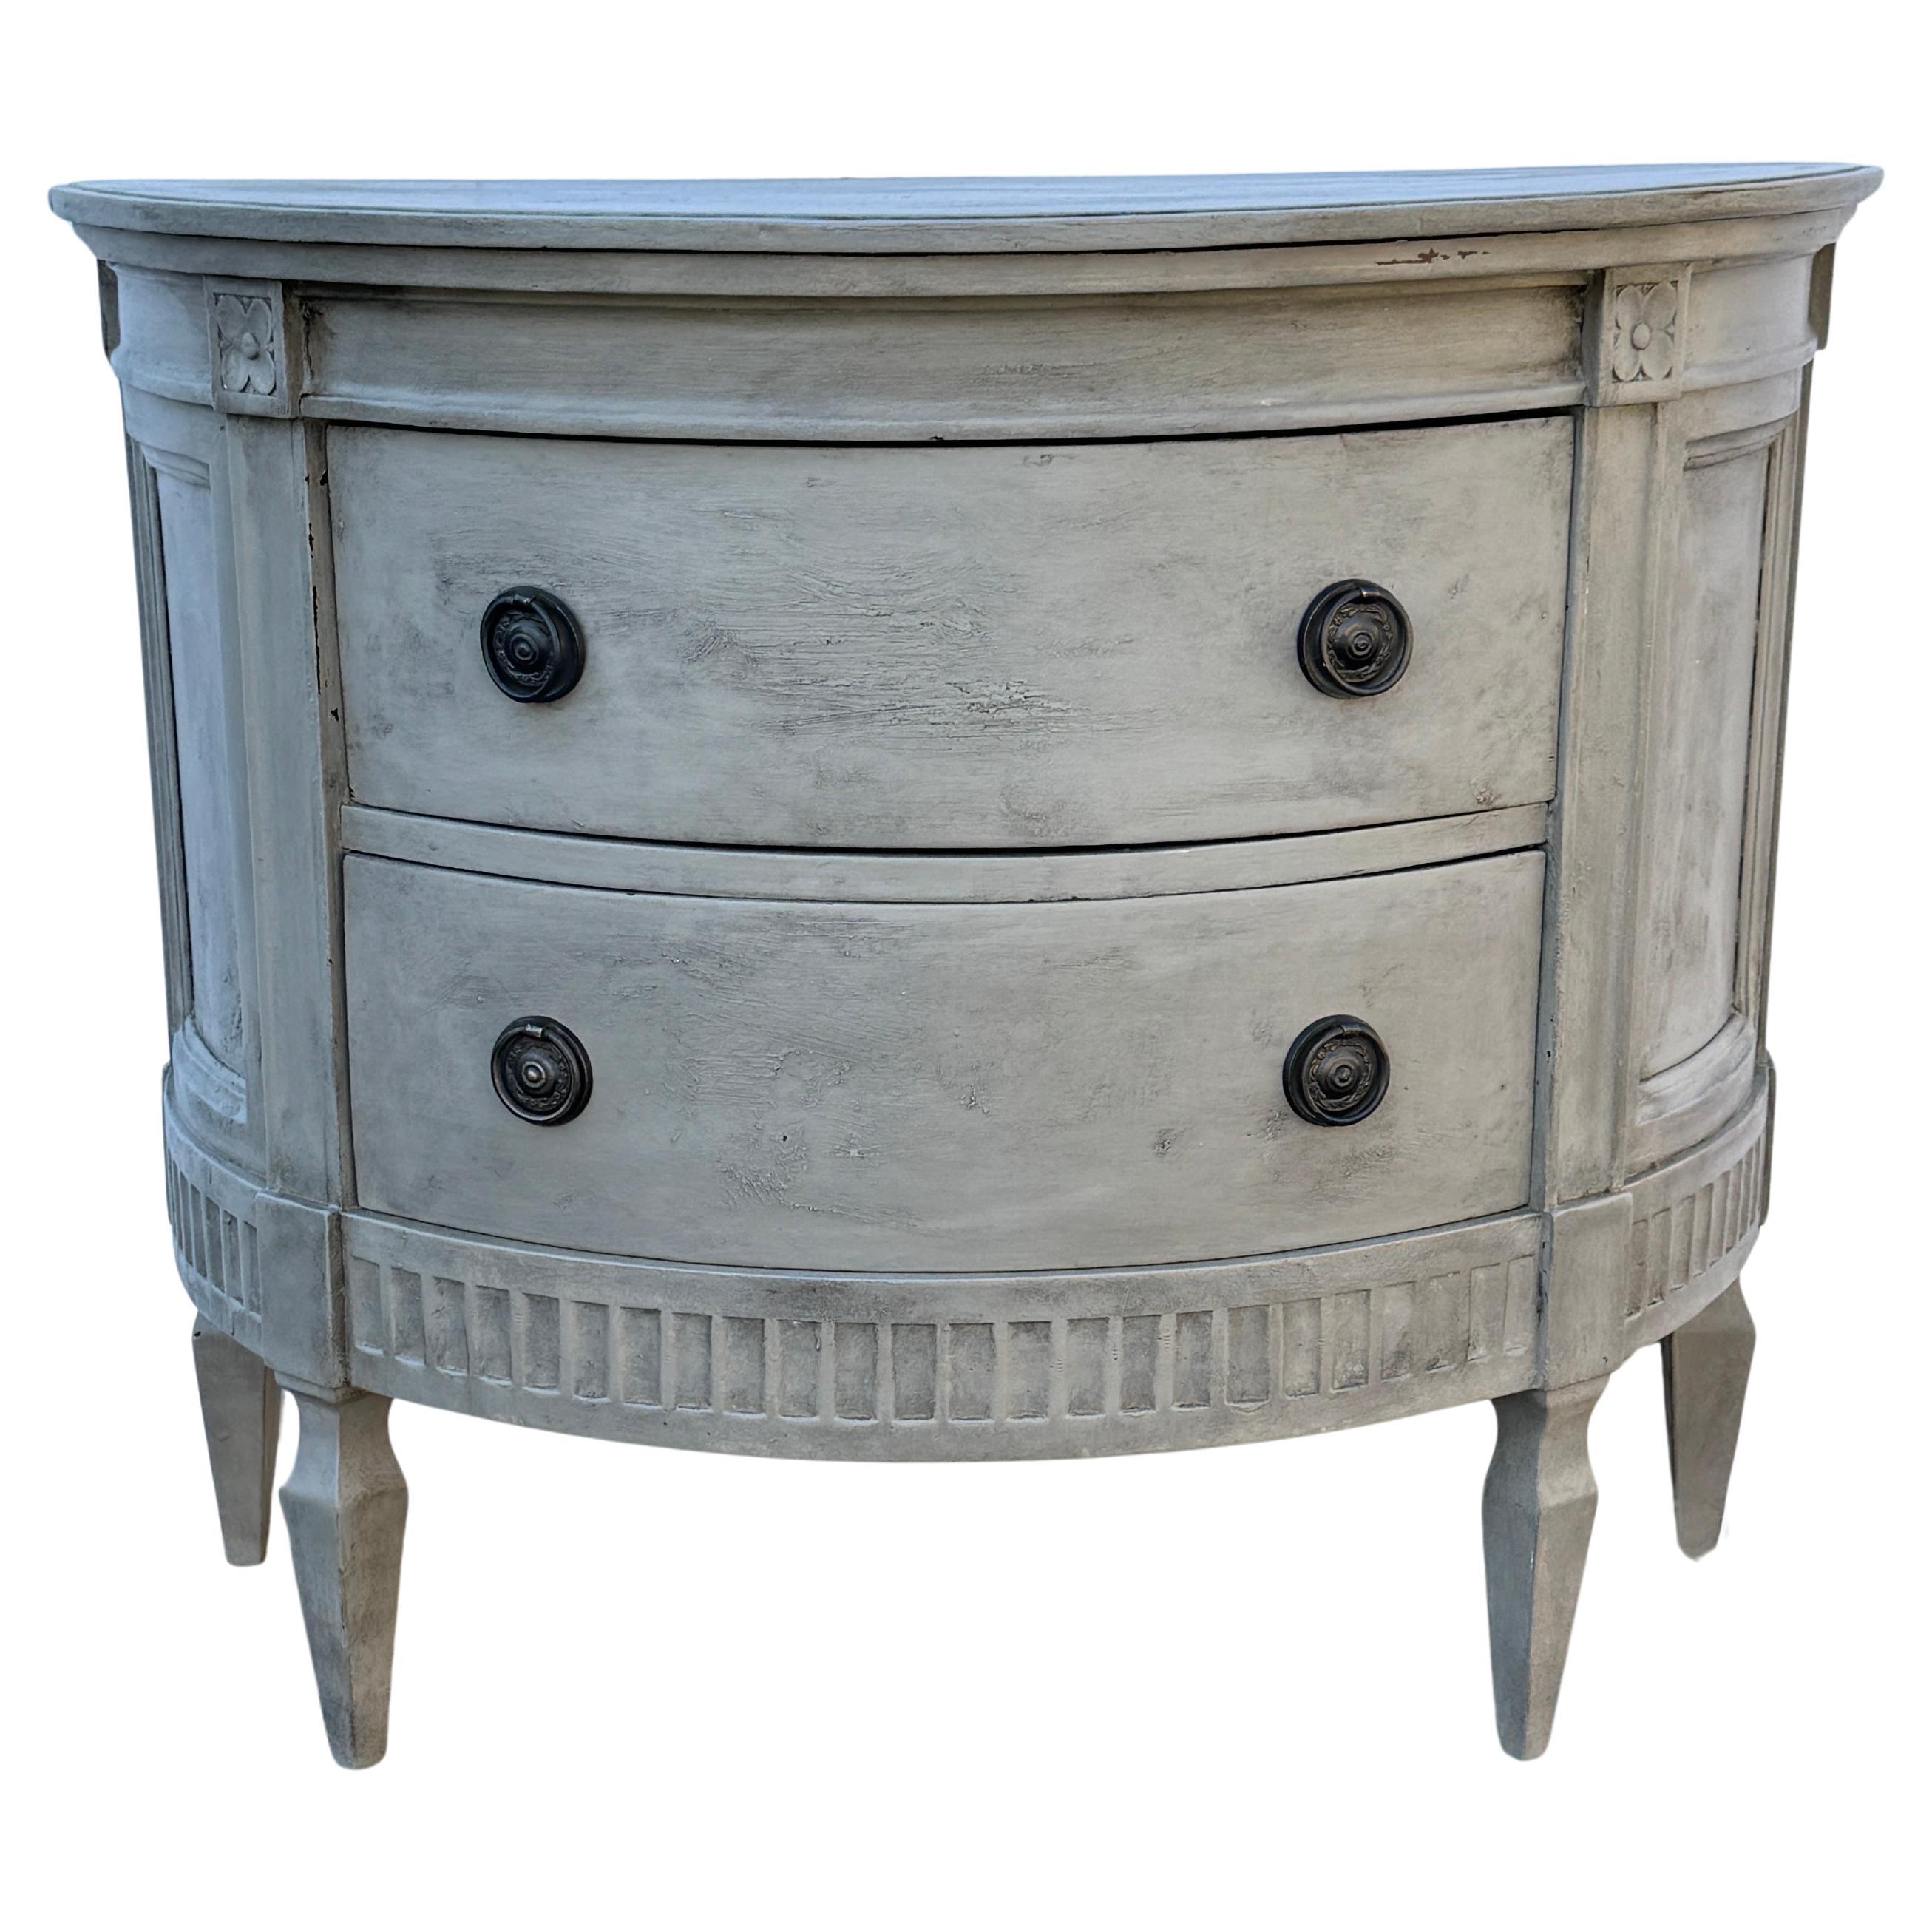 Swedish Gustavian Style Painted Commode Chest of Drawers

This classic Swedish style two drawer carved and hand painted neutral gray toned demi-lune chest or table has been constructed from solid wood. Wonderful details on this piece including a